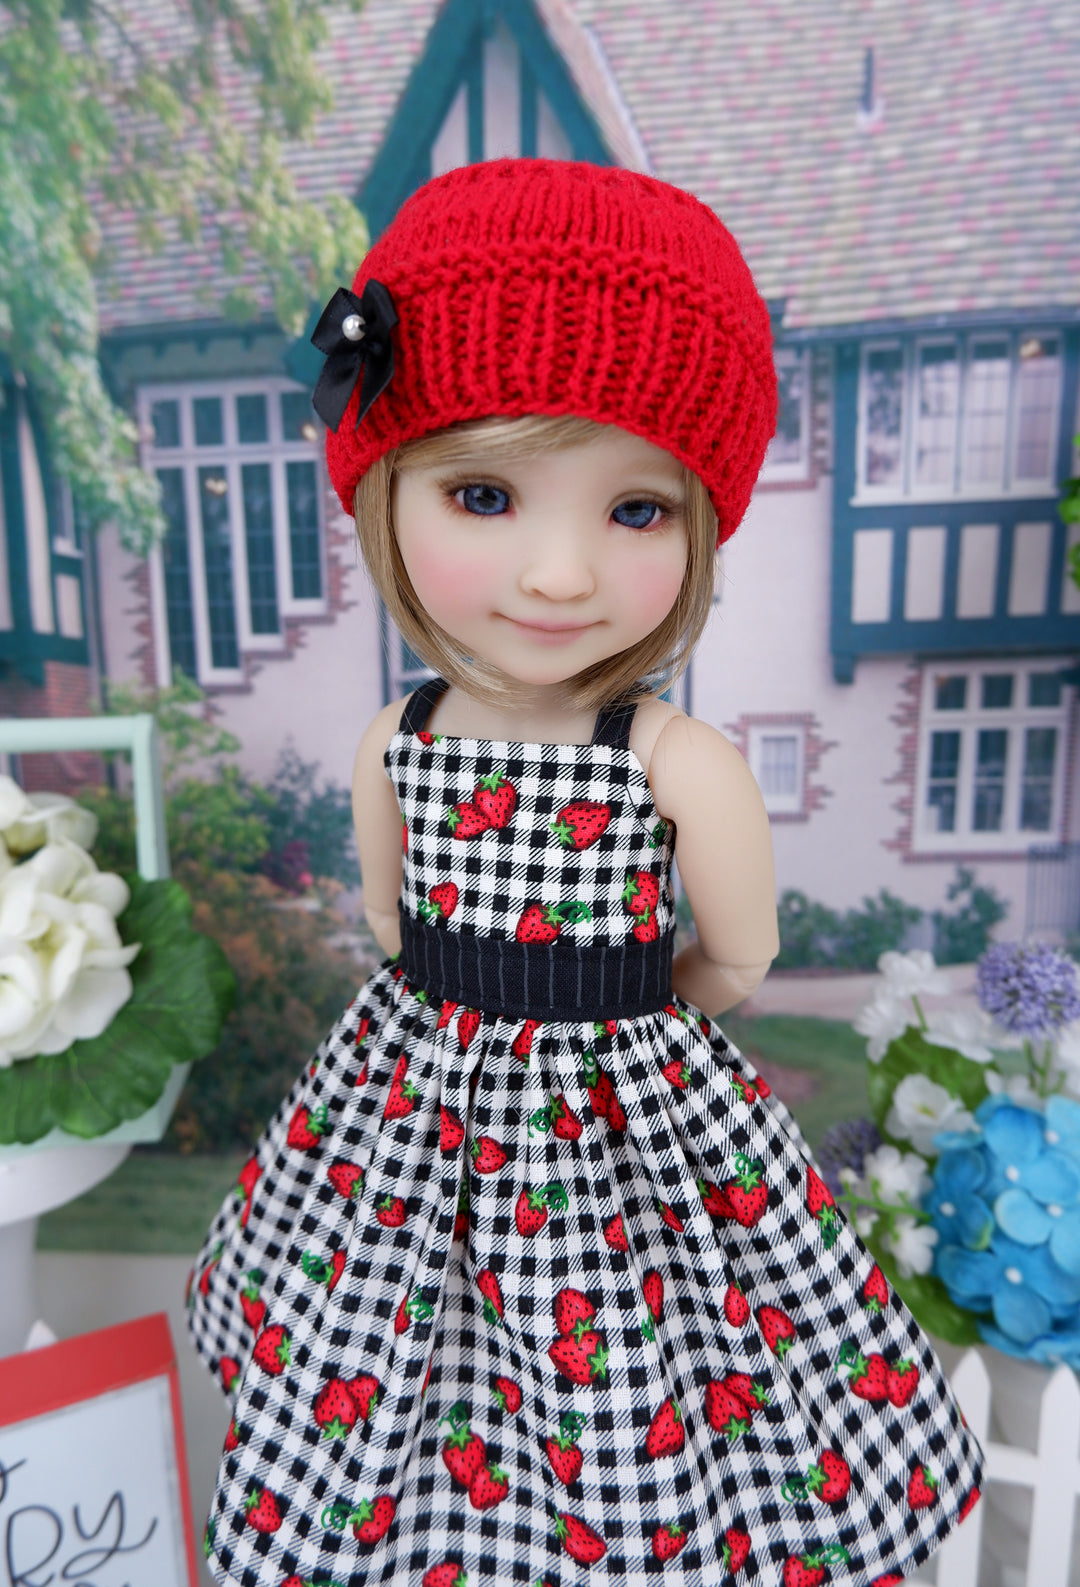 Strawberry Picnic - dress & sweater with saddle shoes for Ruby Red Fashion Friends doll